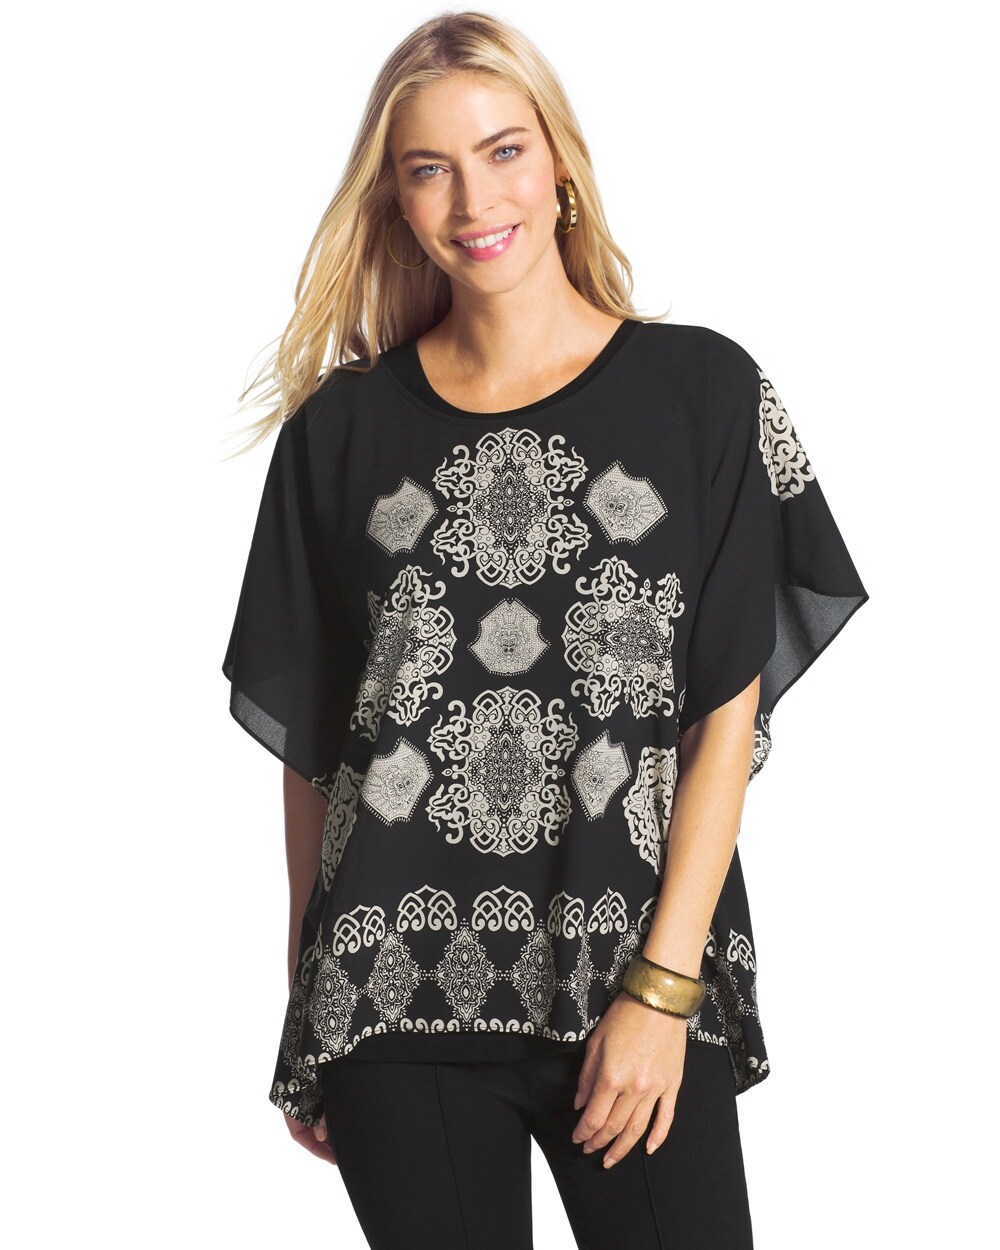 Travelers Collection Medallion Print Top